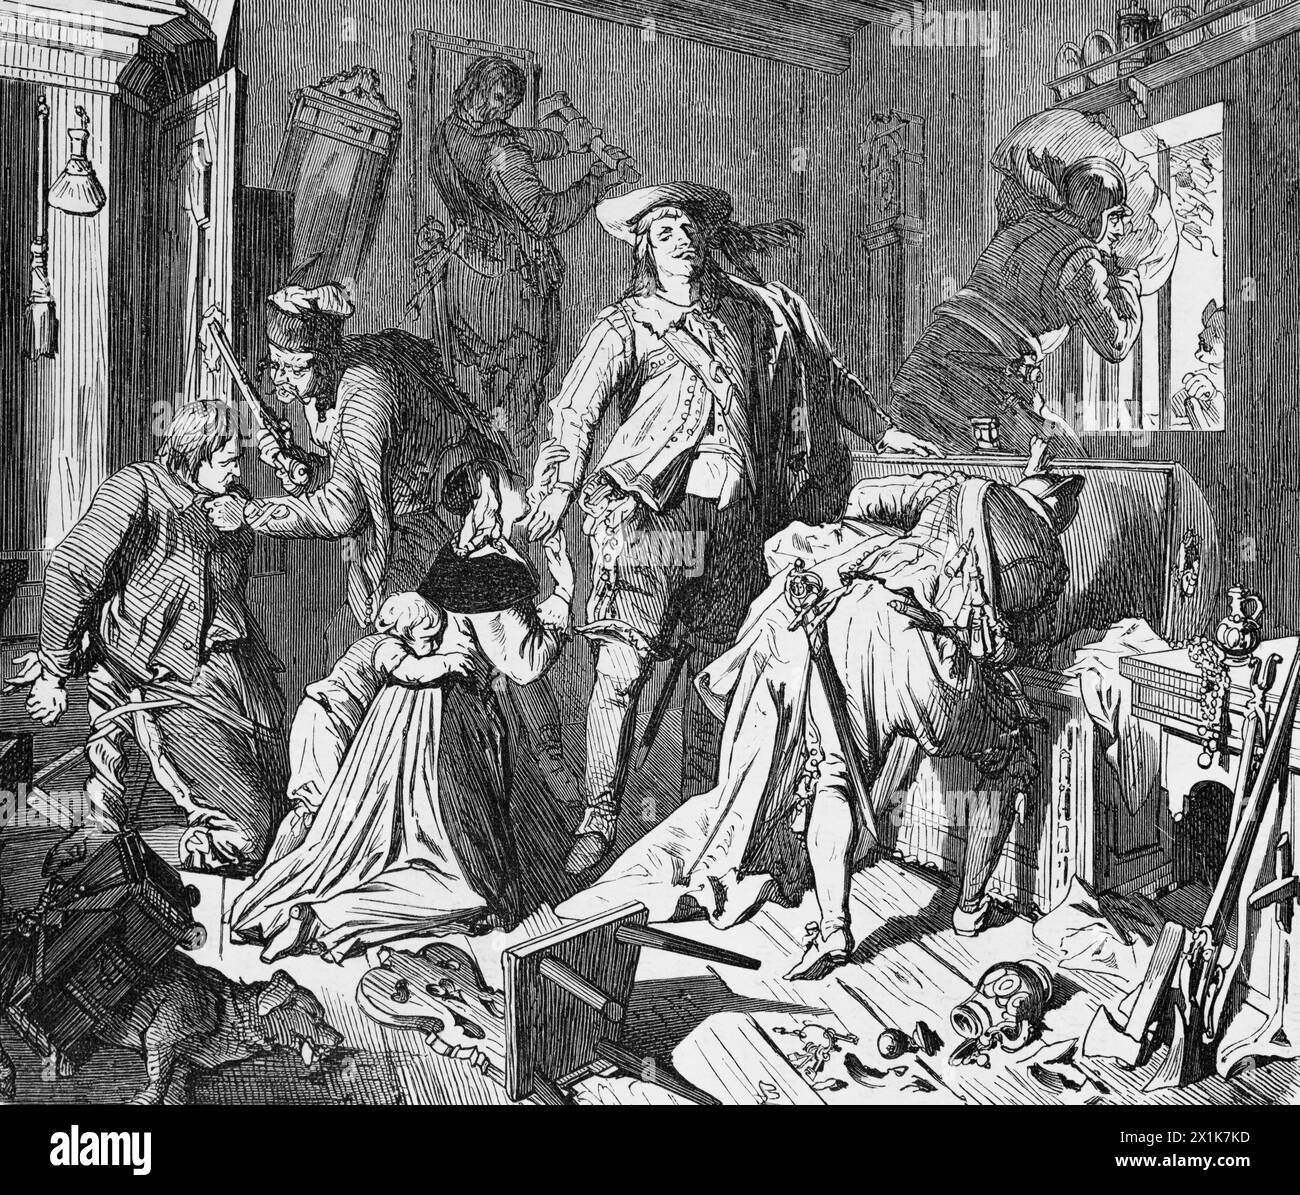 Royal troops looting a private home in Brandenburg in the 17th century, historic illustration 1880 Stock Photo